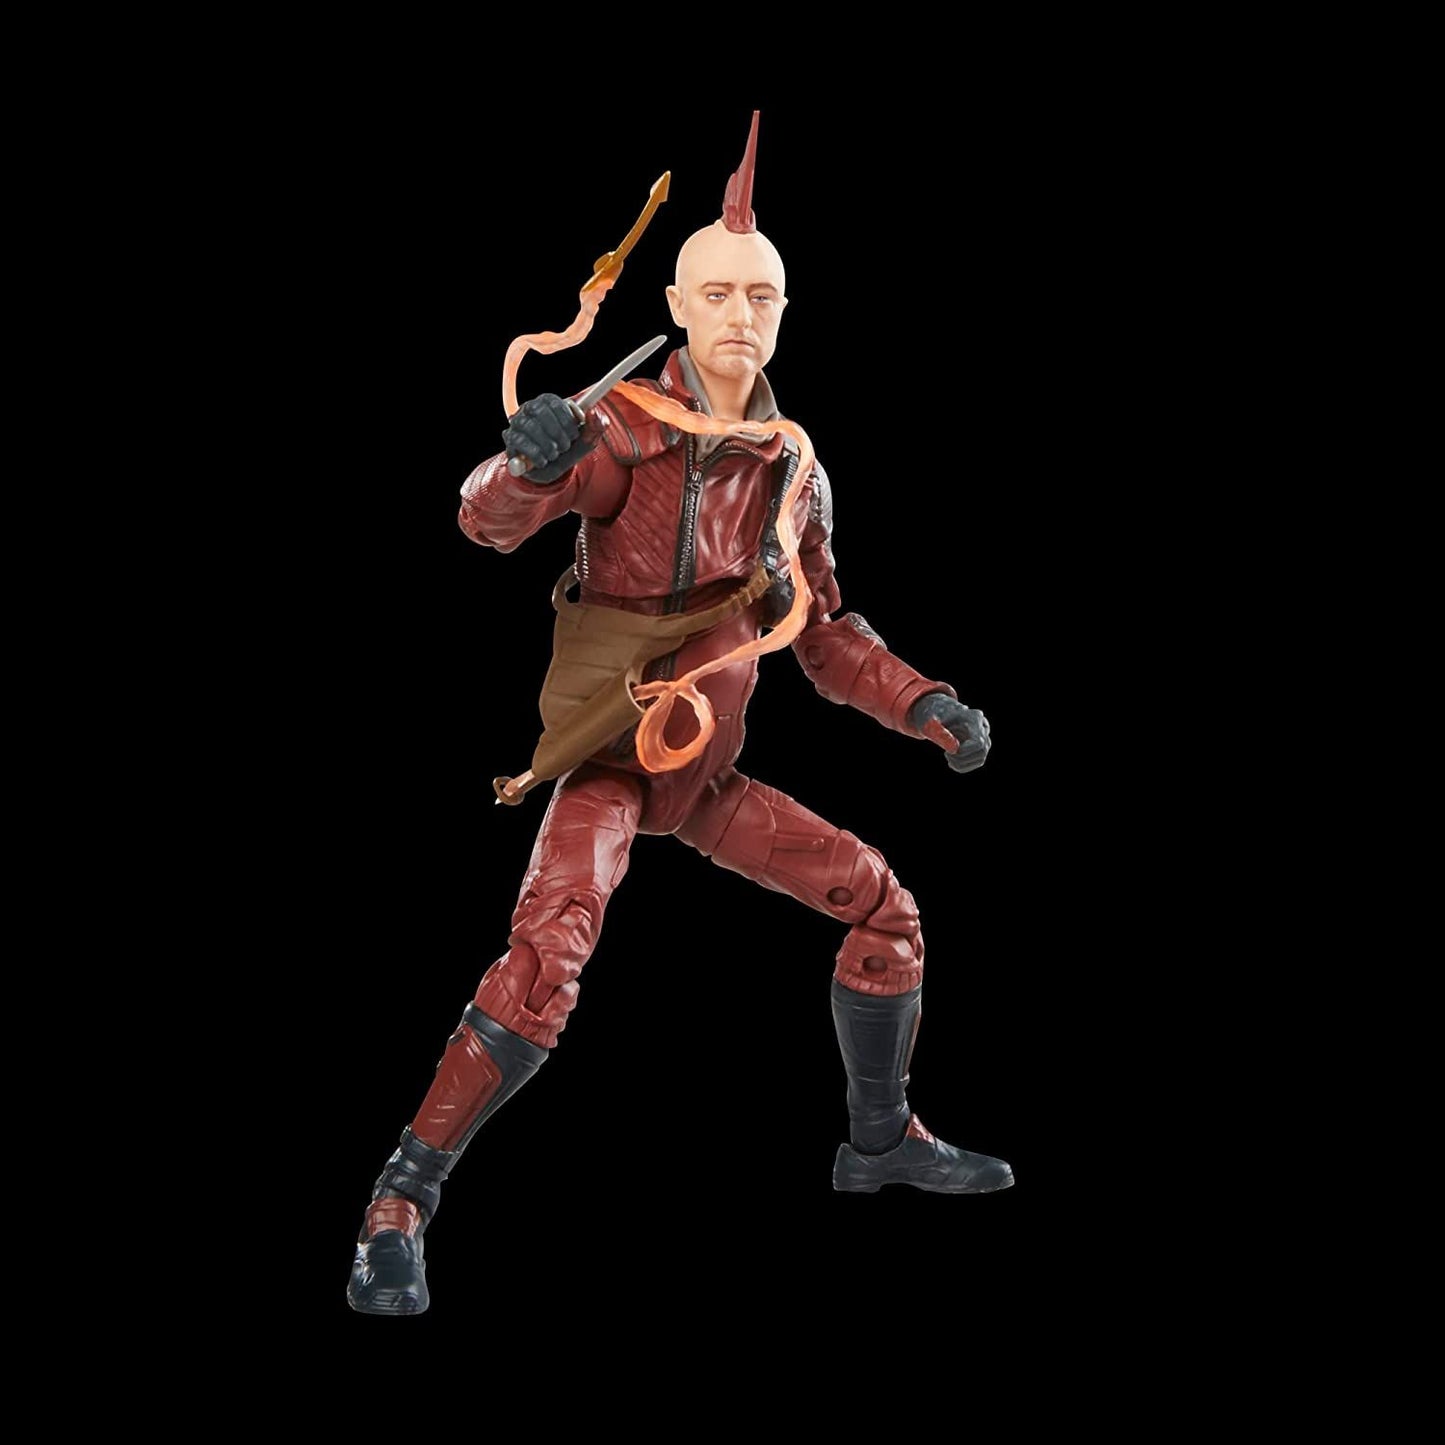 Guardians of the Galaxy Vol. 3 Marvel Legends Kraglin 6-Inch Action Figure pose 2 - Heretoserveyou